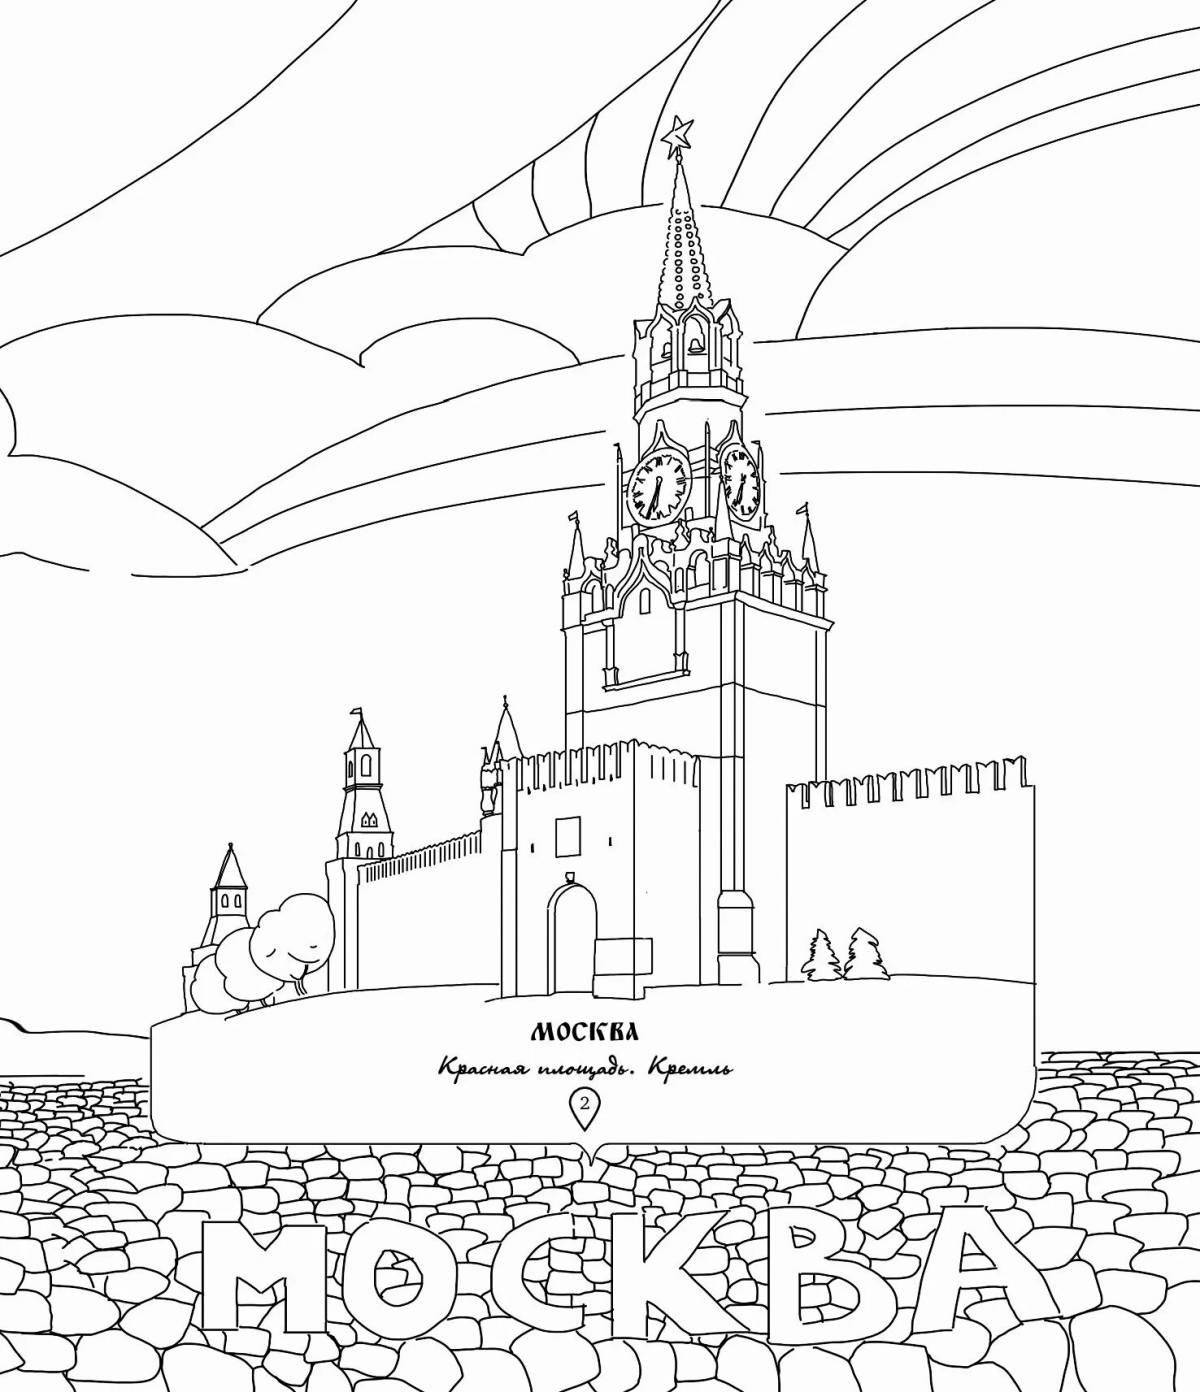 Magnificent moscow grade 1 coloring book